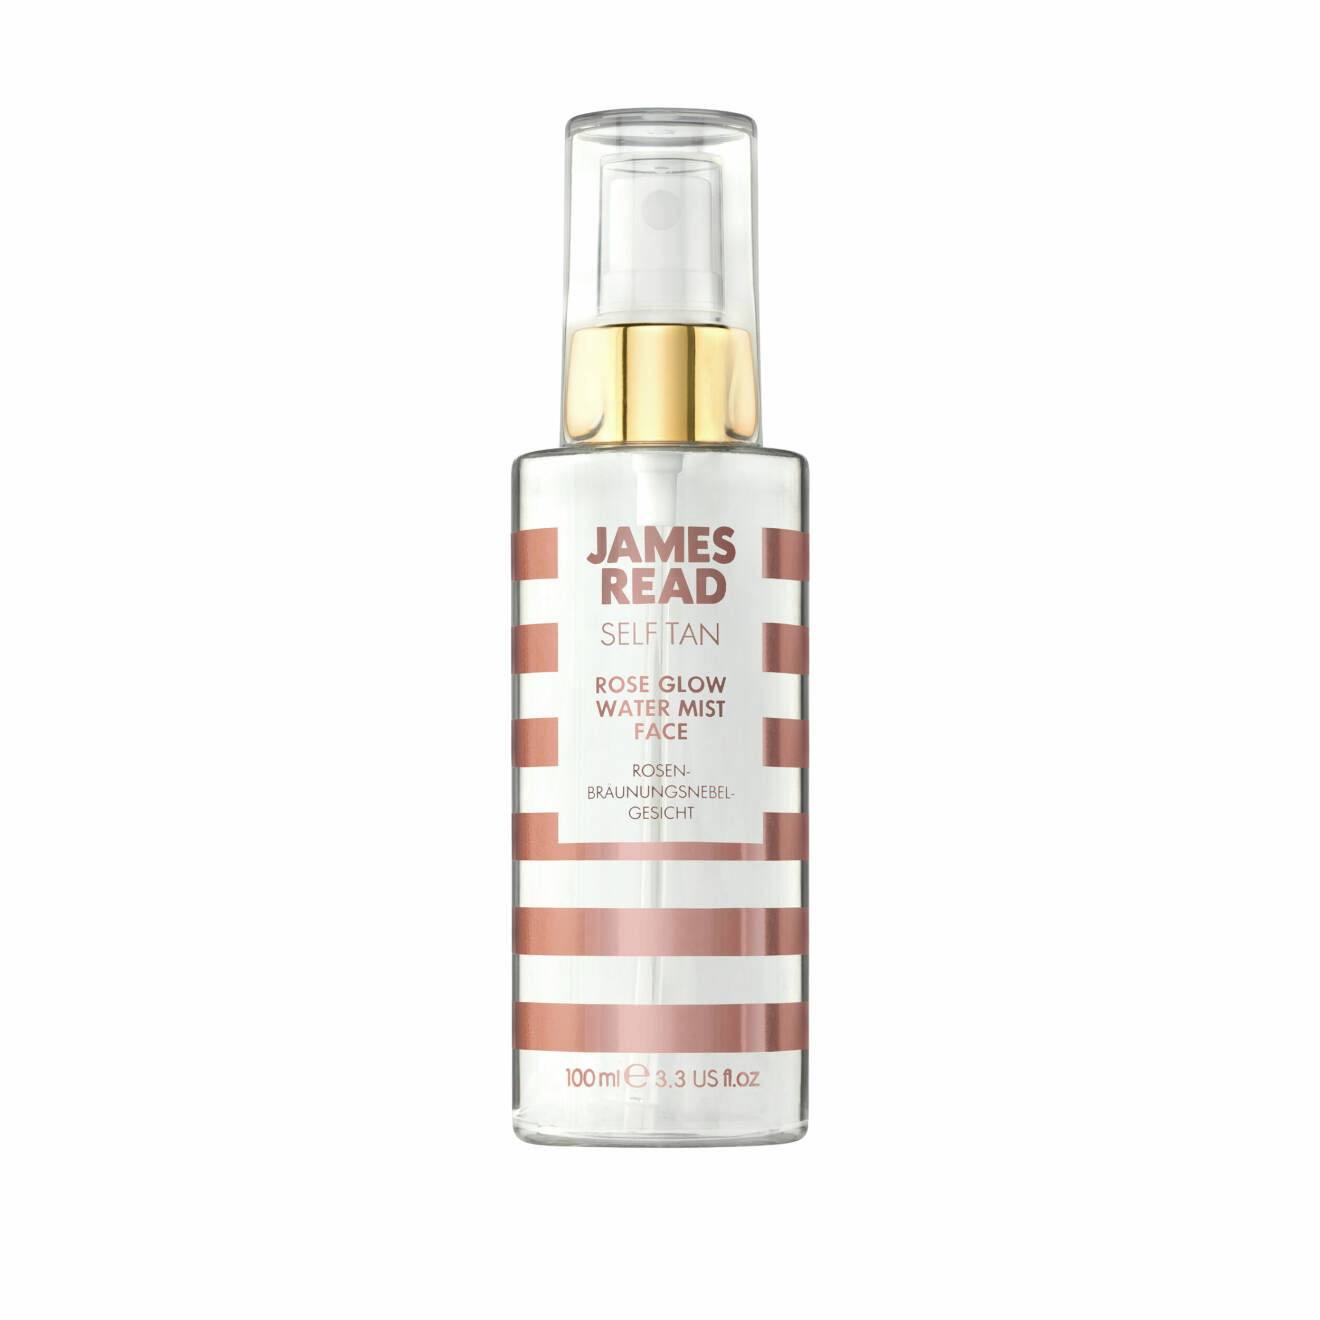 james read rose glow water mist face